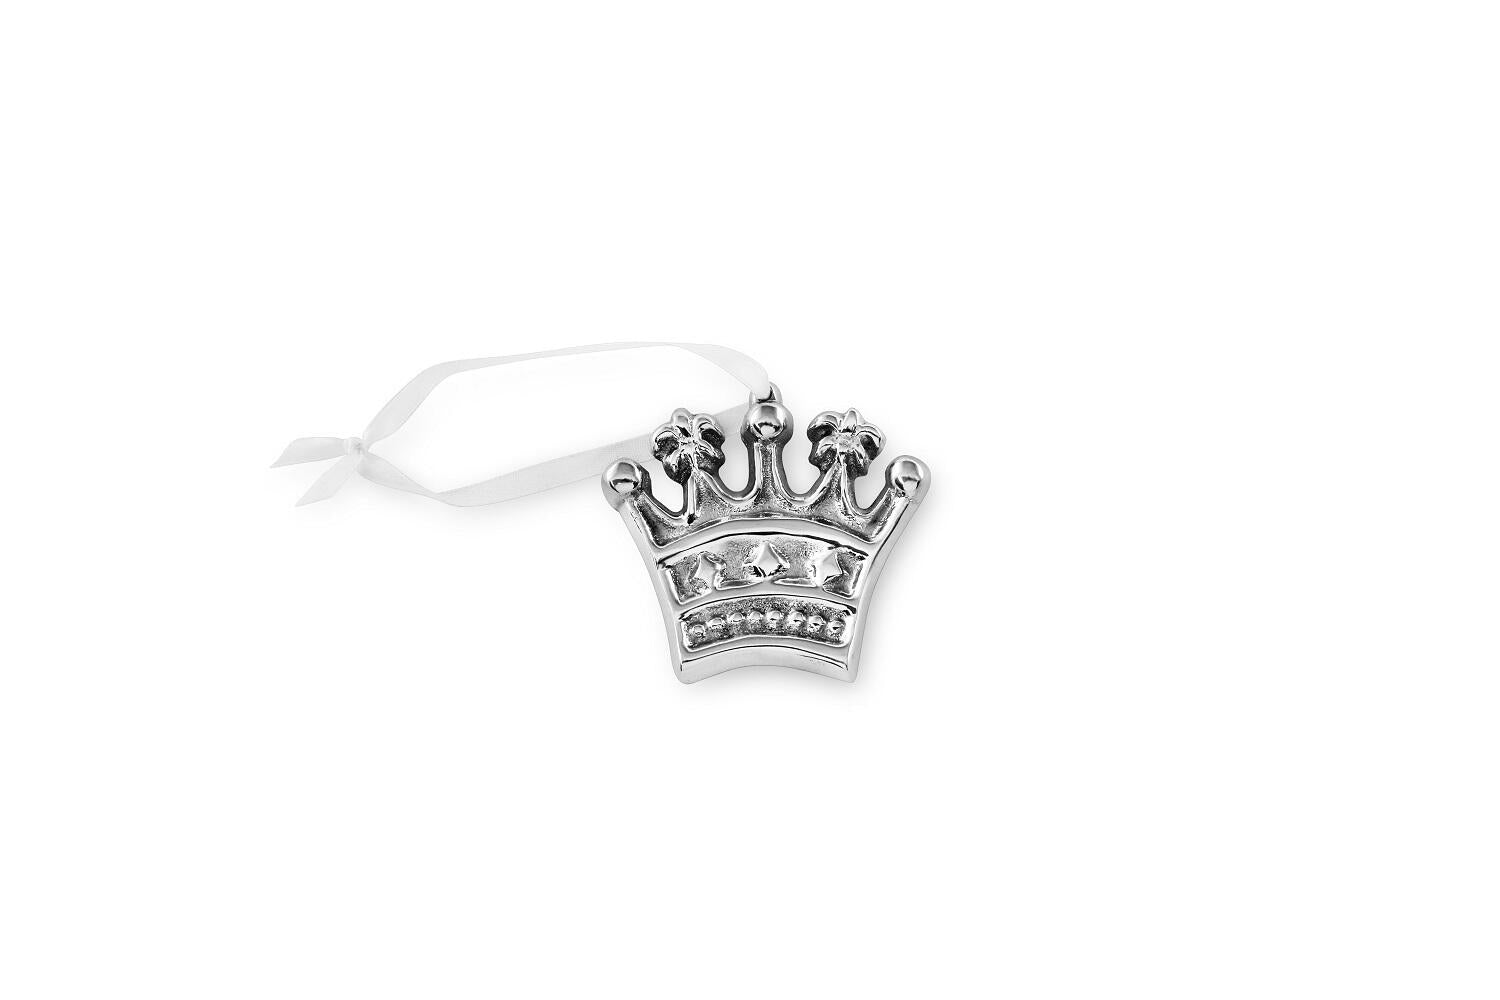 HOLIDAY Crown Ornament